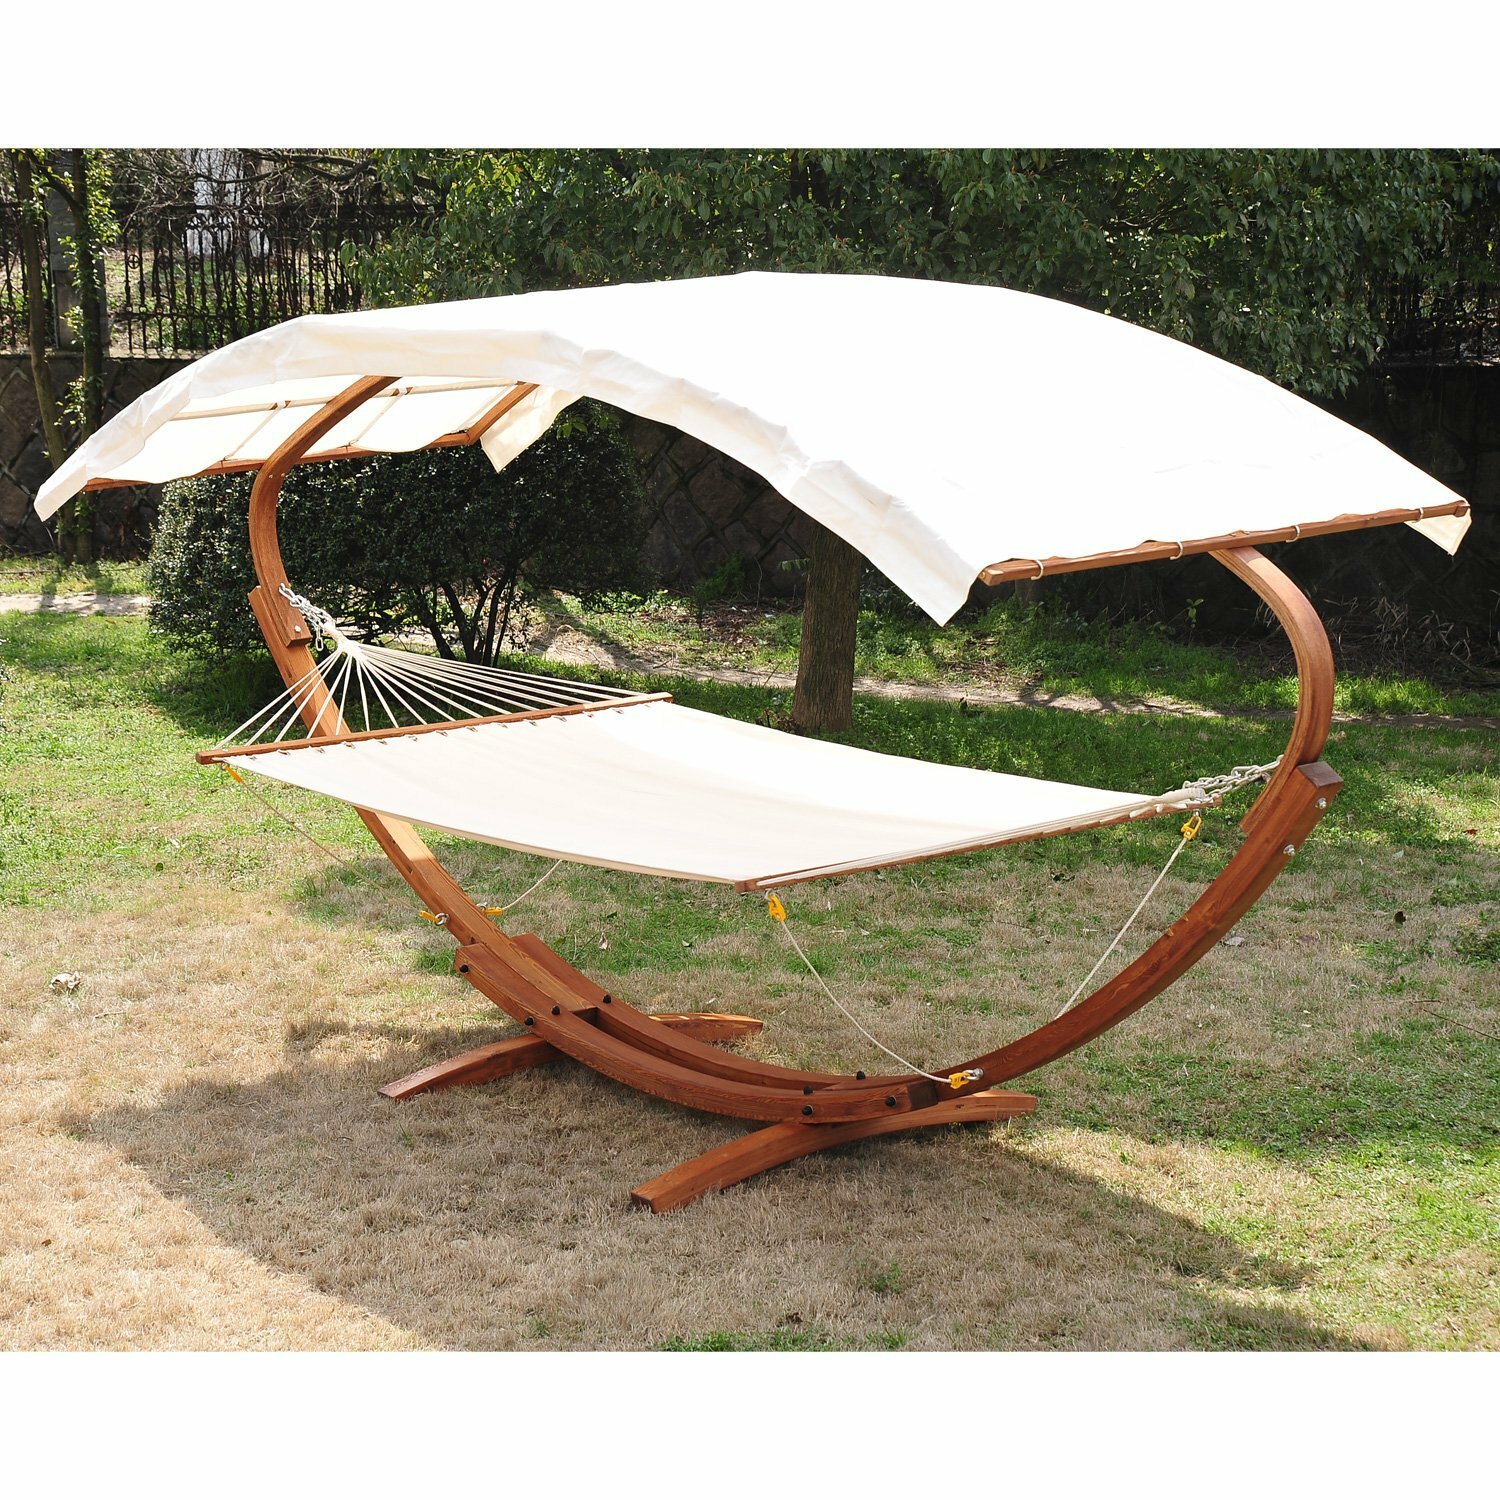 Outsunny Double Patio Deck Hammock w/Wood Stand and Canopy Outdoor Two Person Extra Wide Sun Bed Backyard Garden Canopied Hanging Lounge Seat